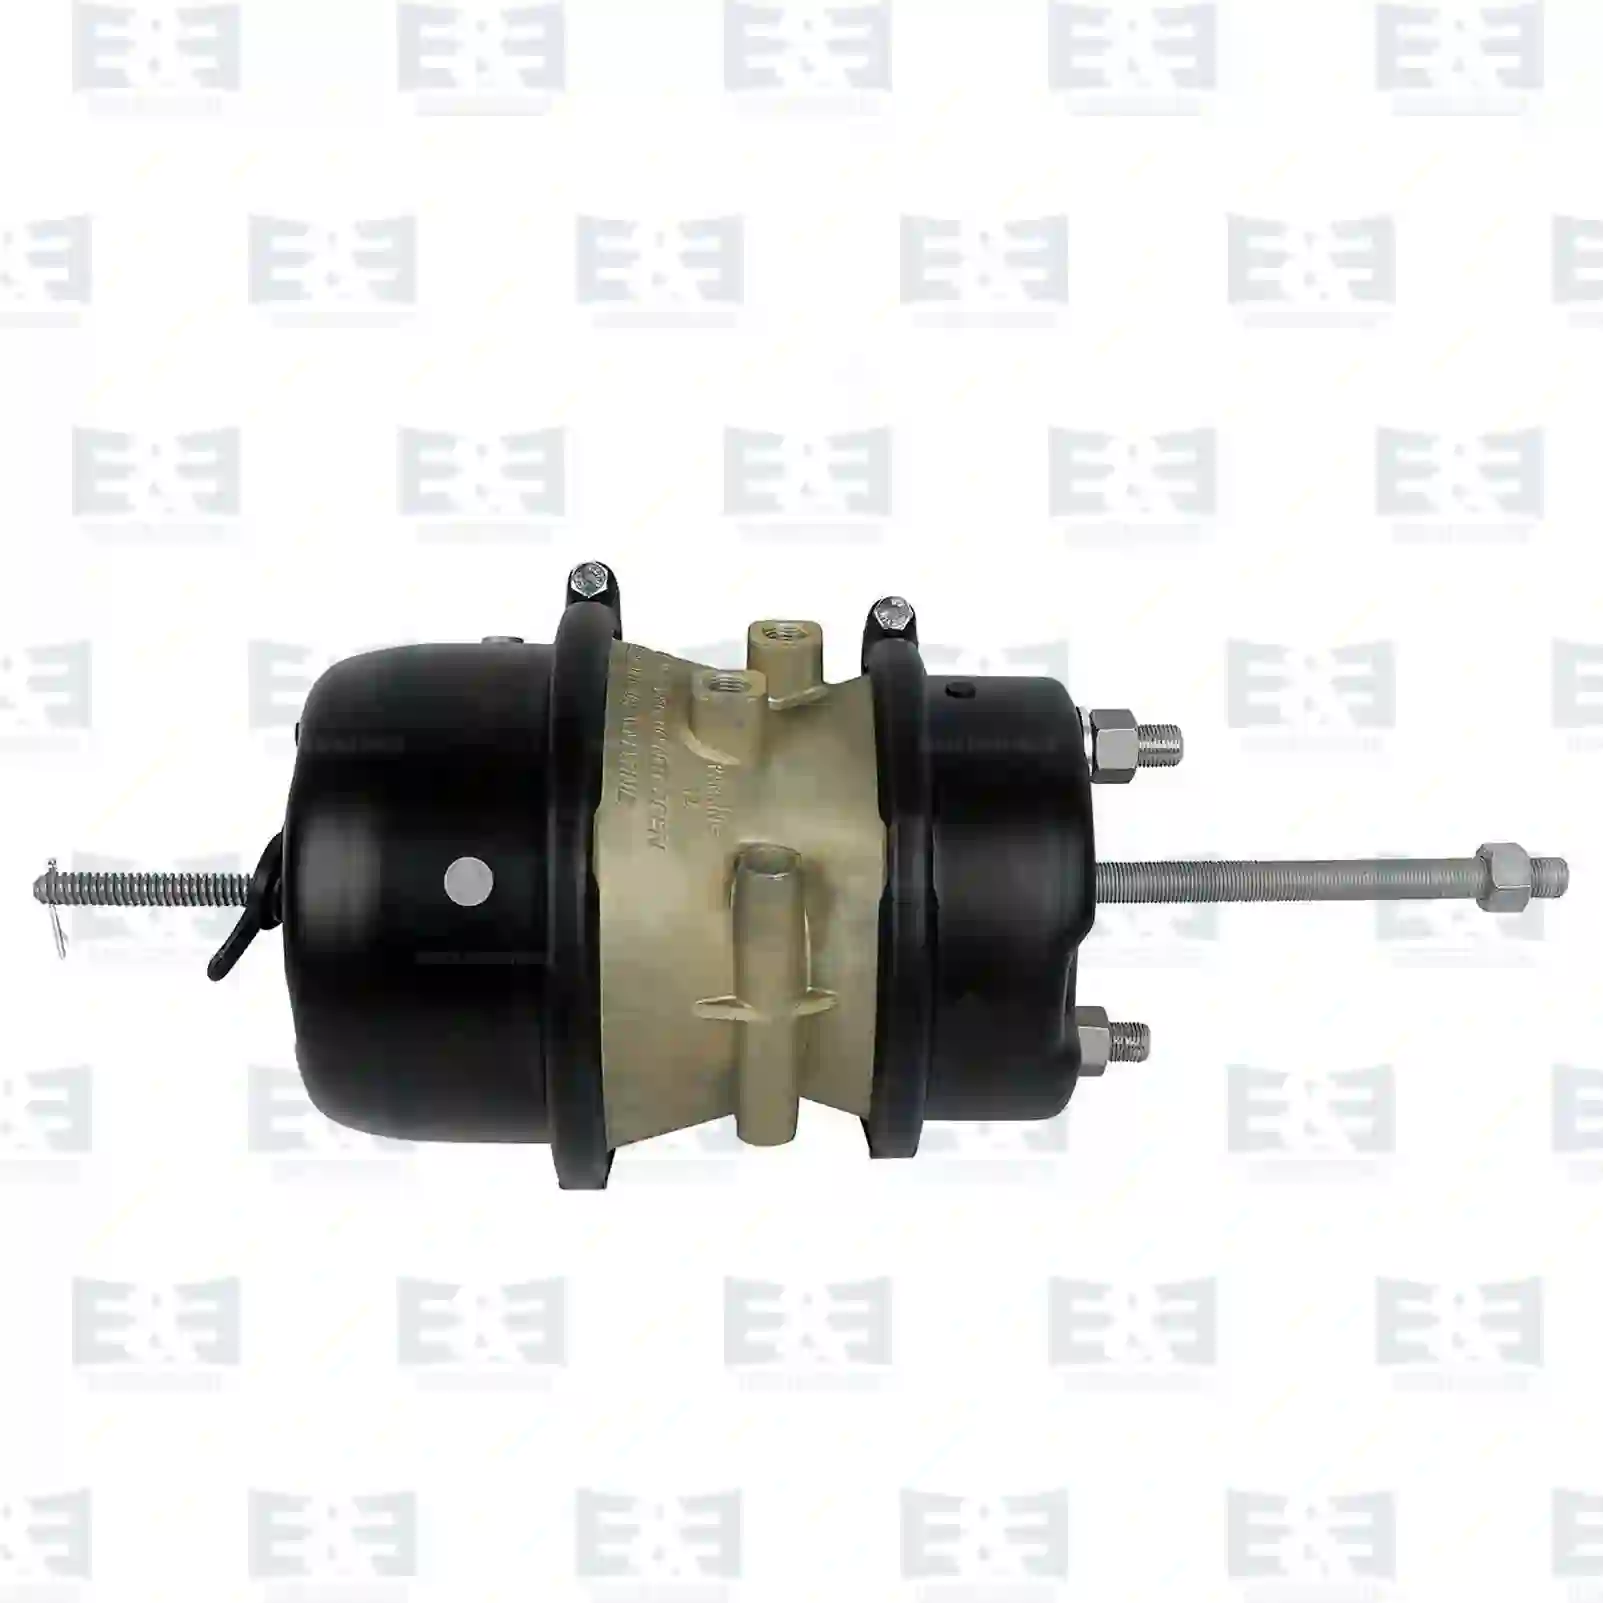 Brake Cylinders Spring brake cylinder, EE No 2E2297495 ,  oem no:0203273900, 0544420010, 0544420040, 0544420100, 0544420110, 1325352, 5021170326, 050408 E&E Truck Spare Parts | Truck Spare Parts, Auotomotive Spare Parts